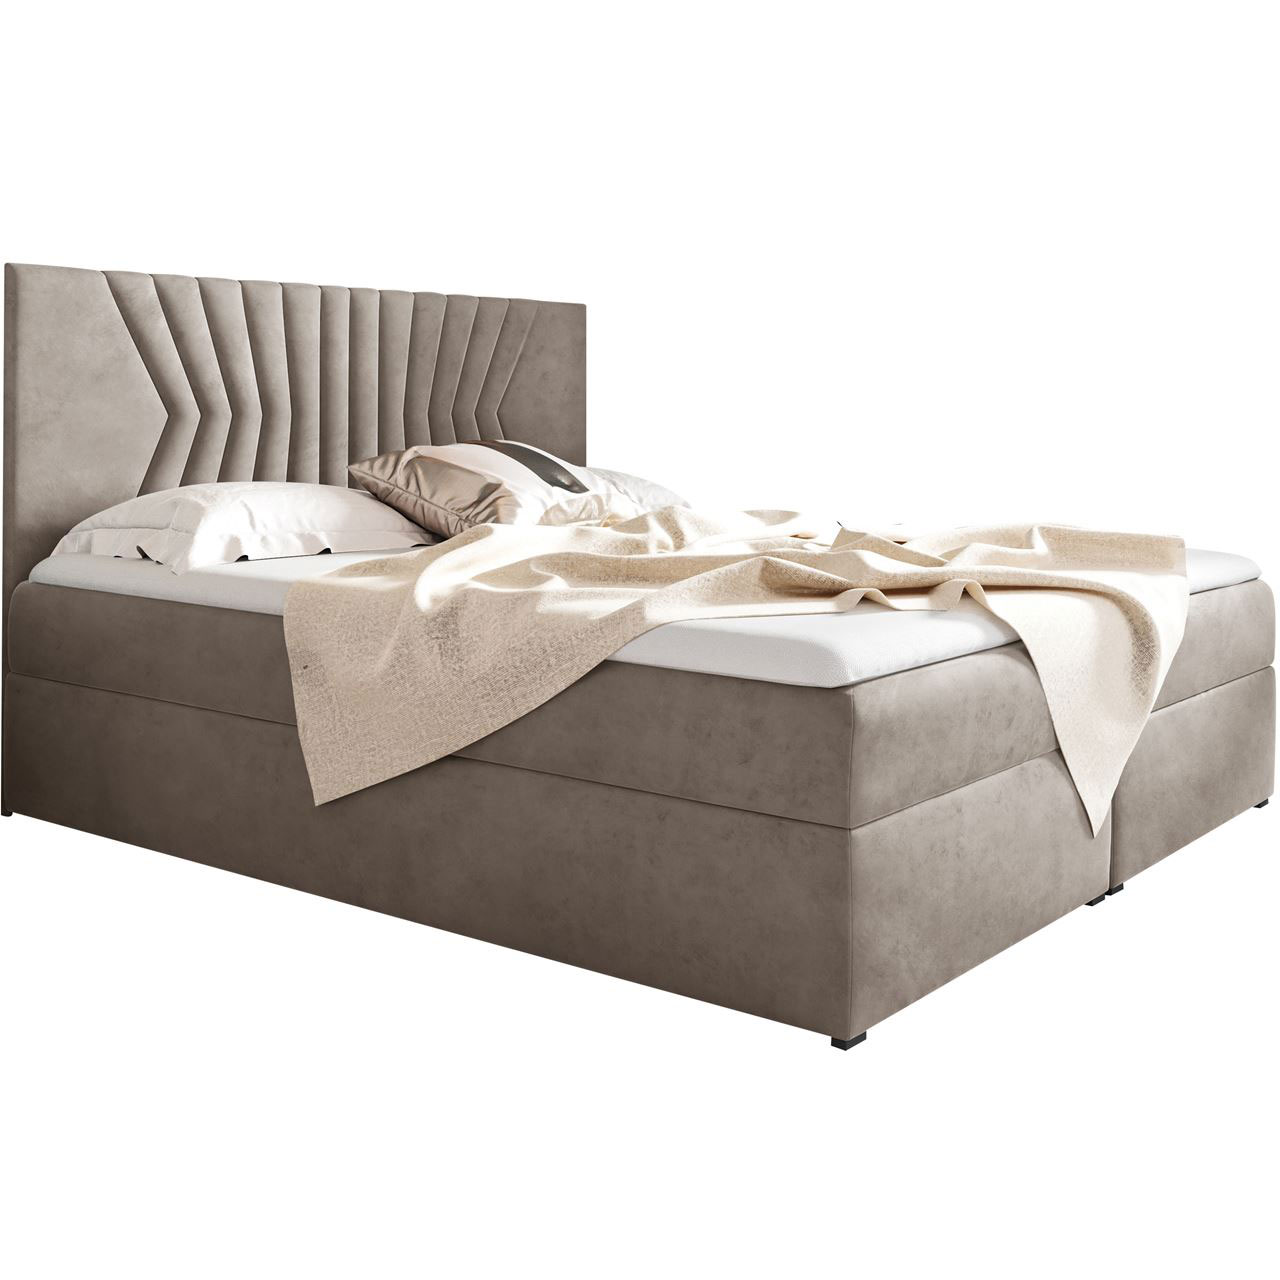 Upholstered bed ASTRO 200x200 fresh 02